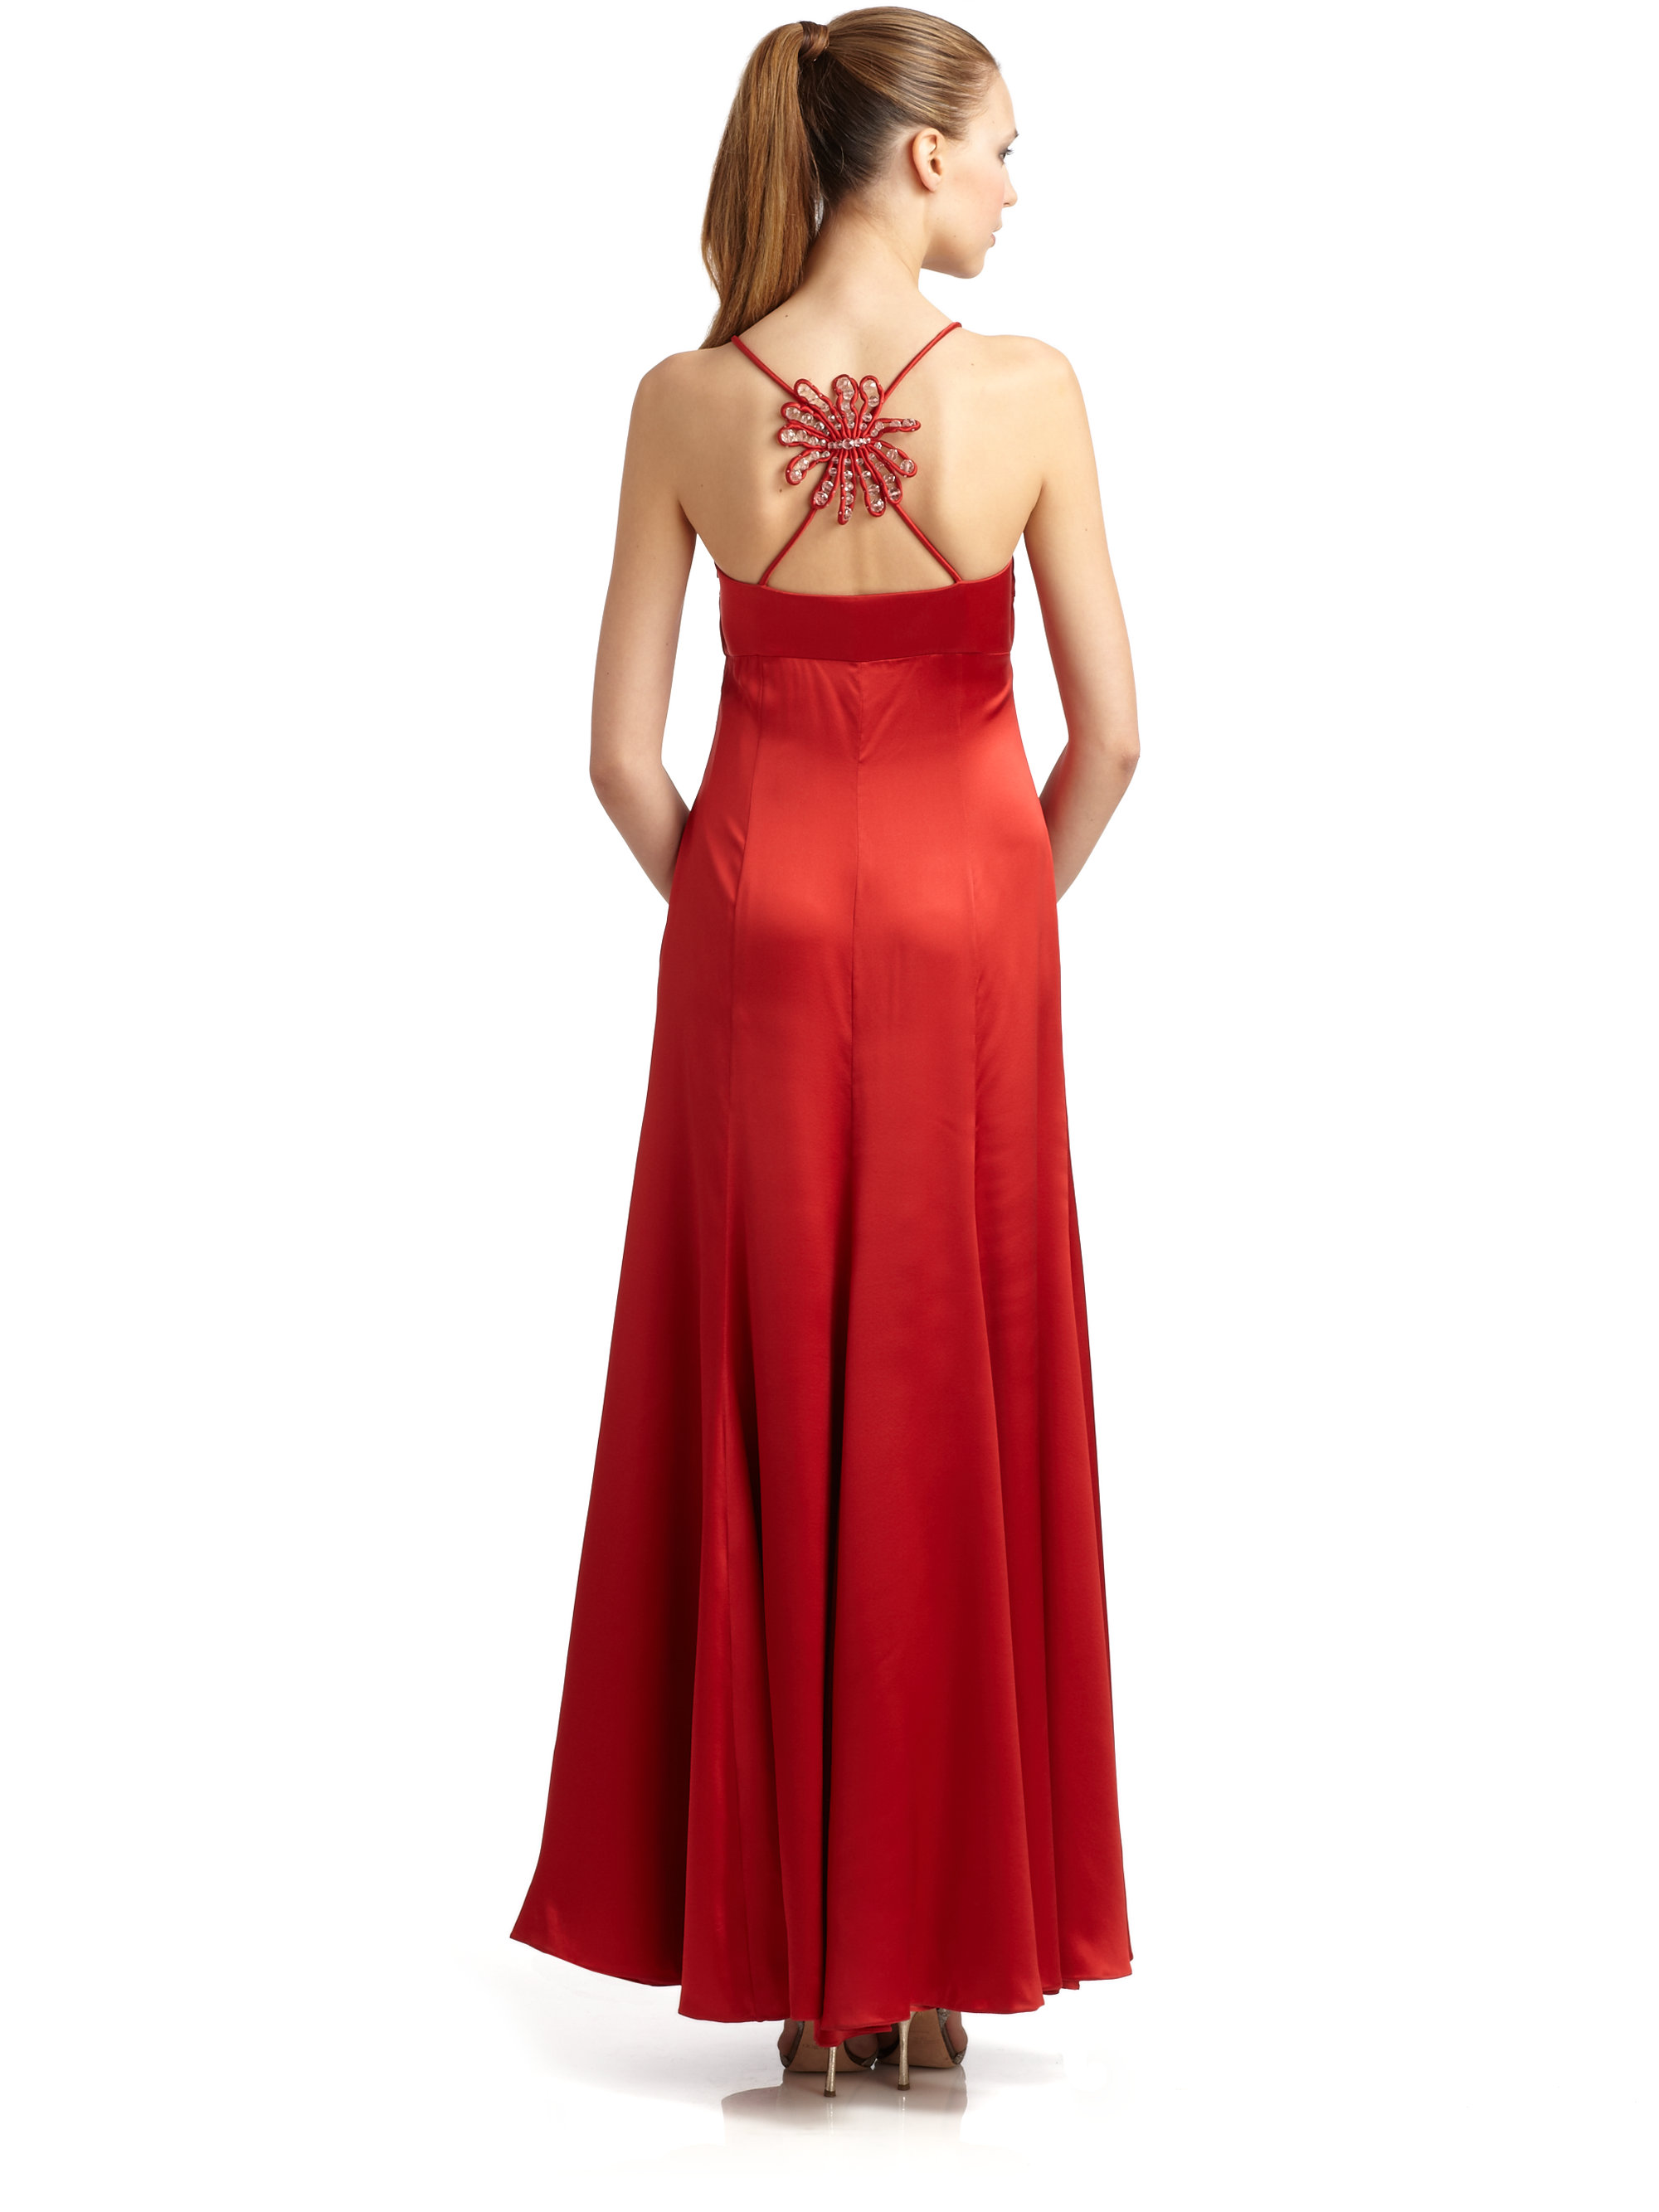 Lyst - Giorgio Armani Ruched Beaded Silk Gown in Red